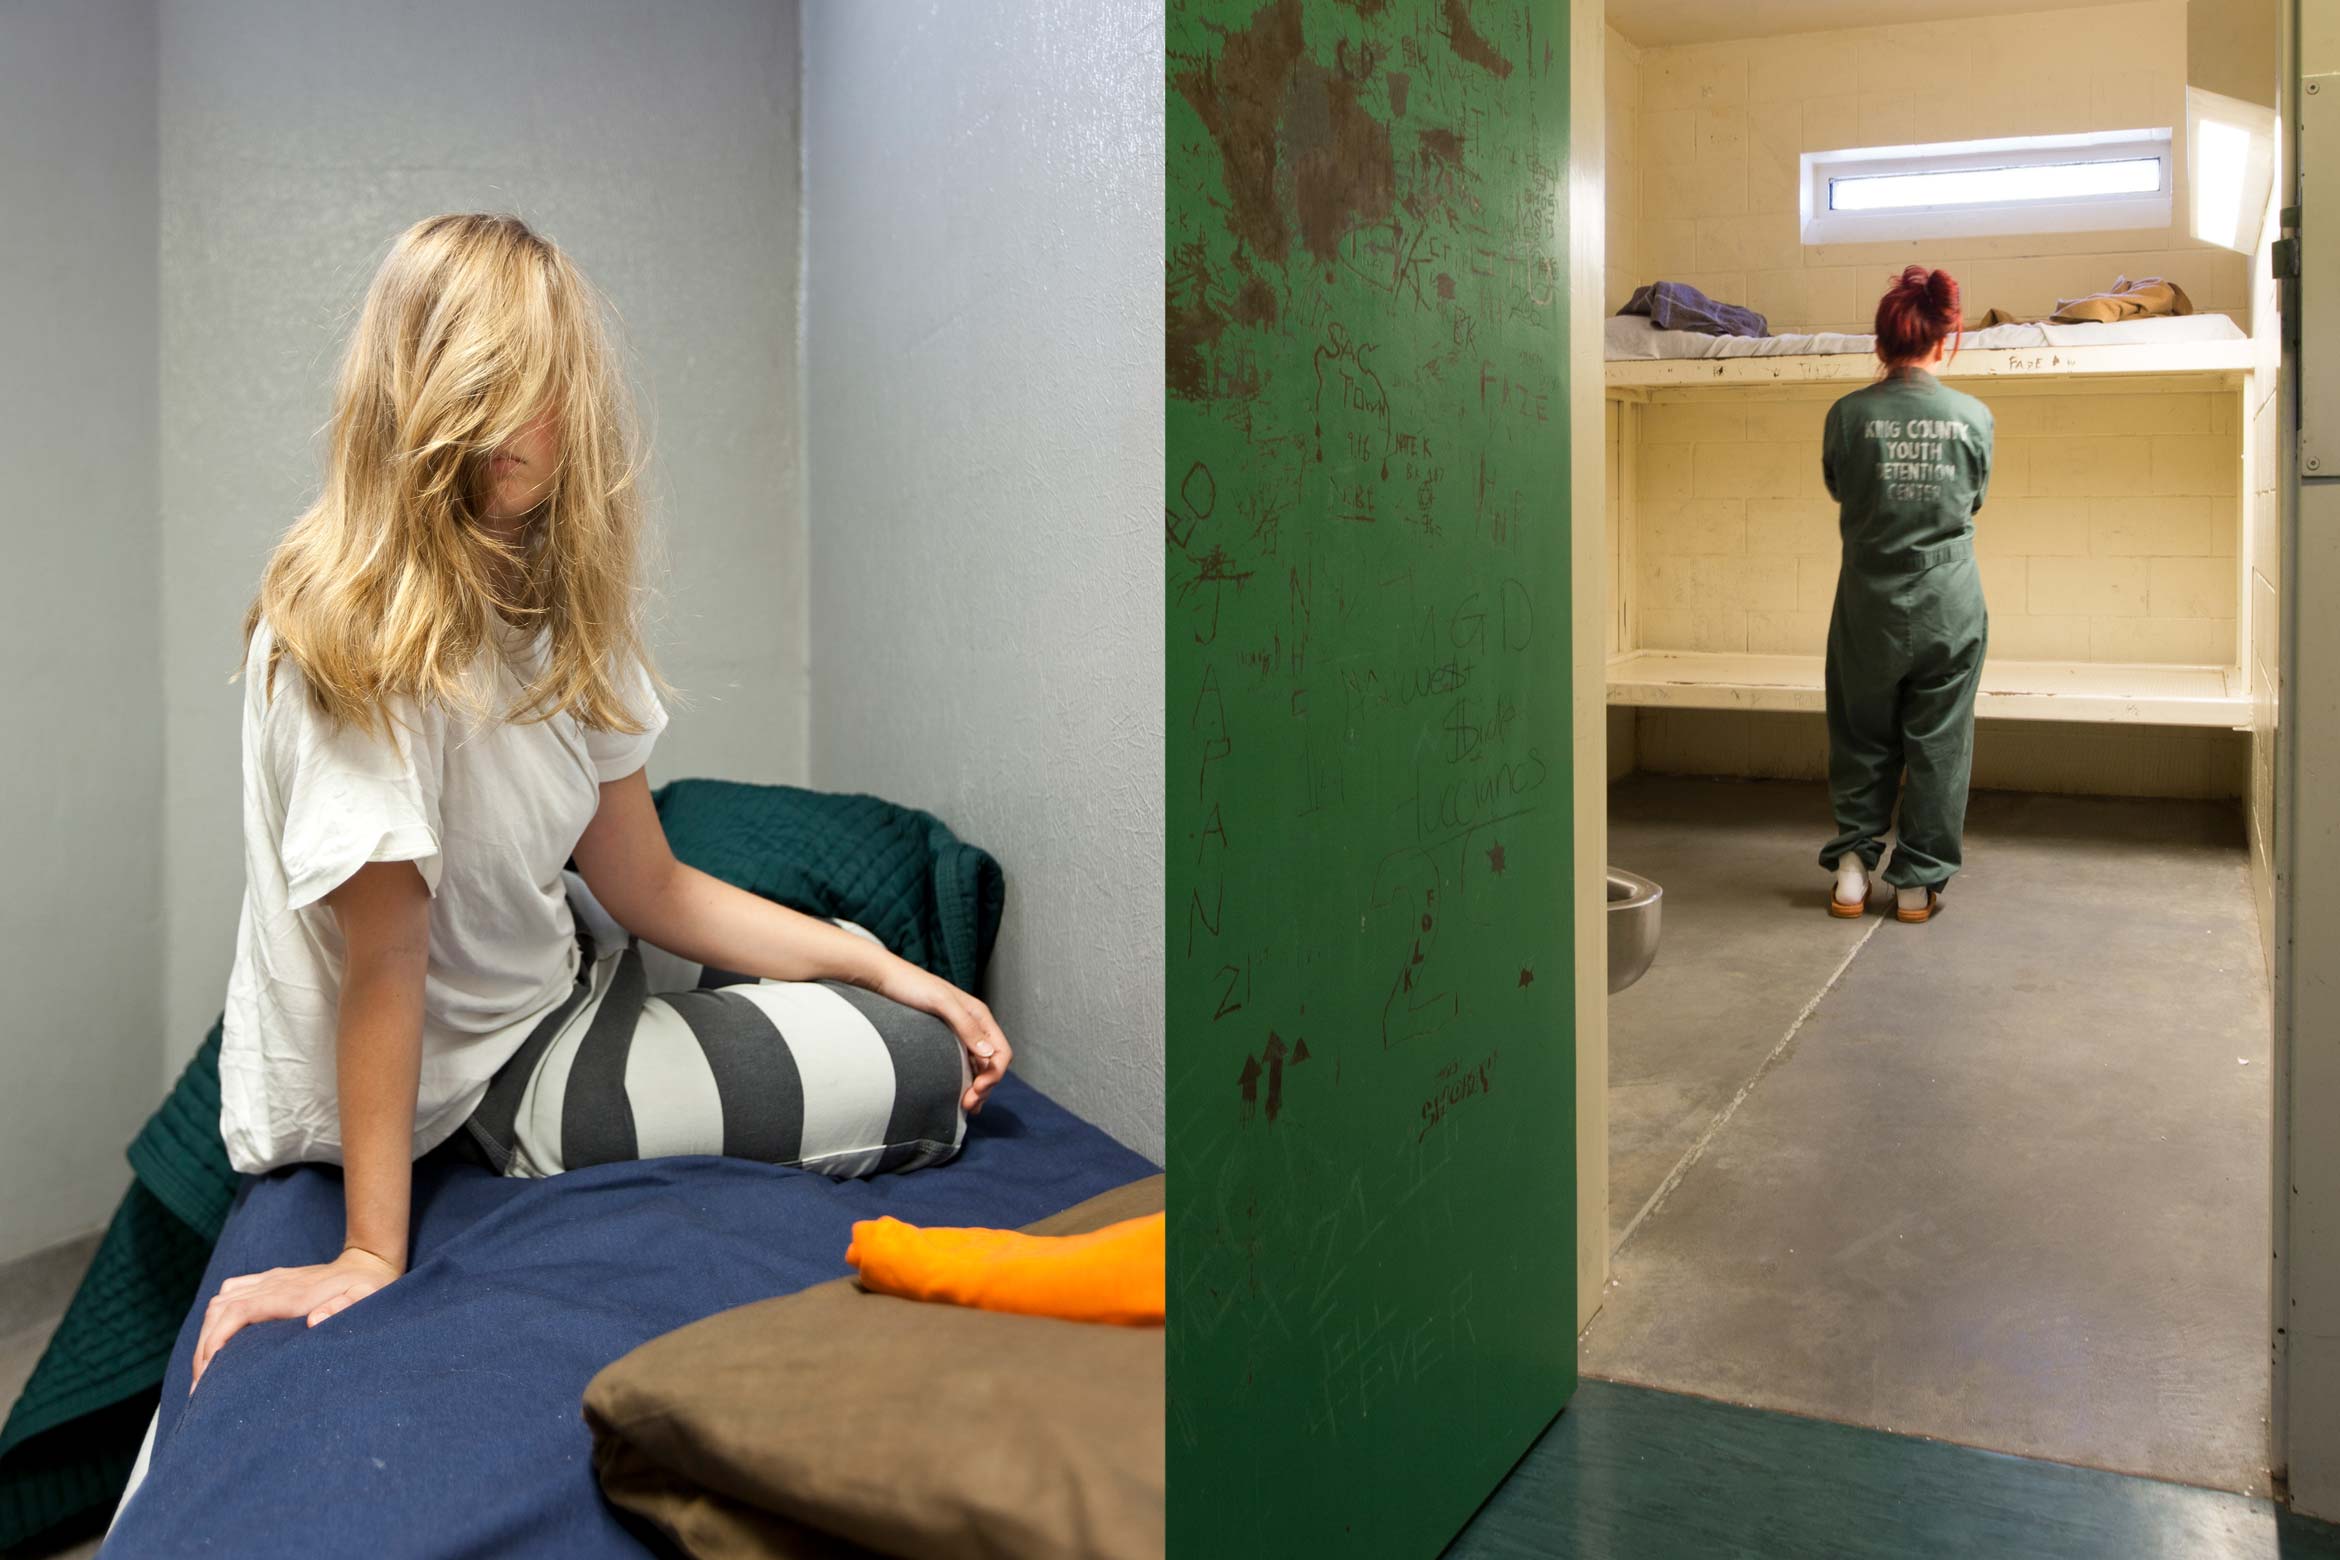 two photos of girls in juvenile detention